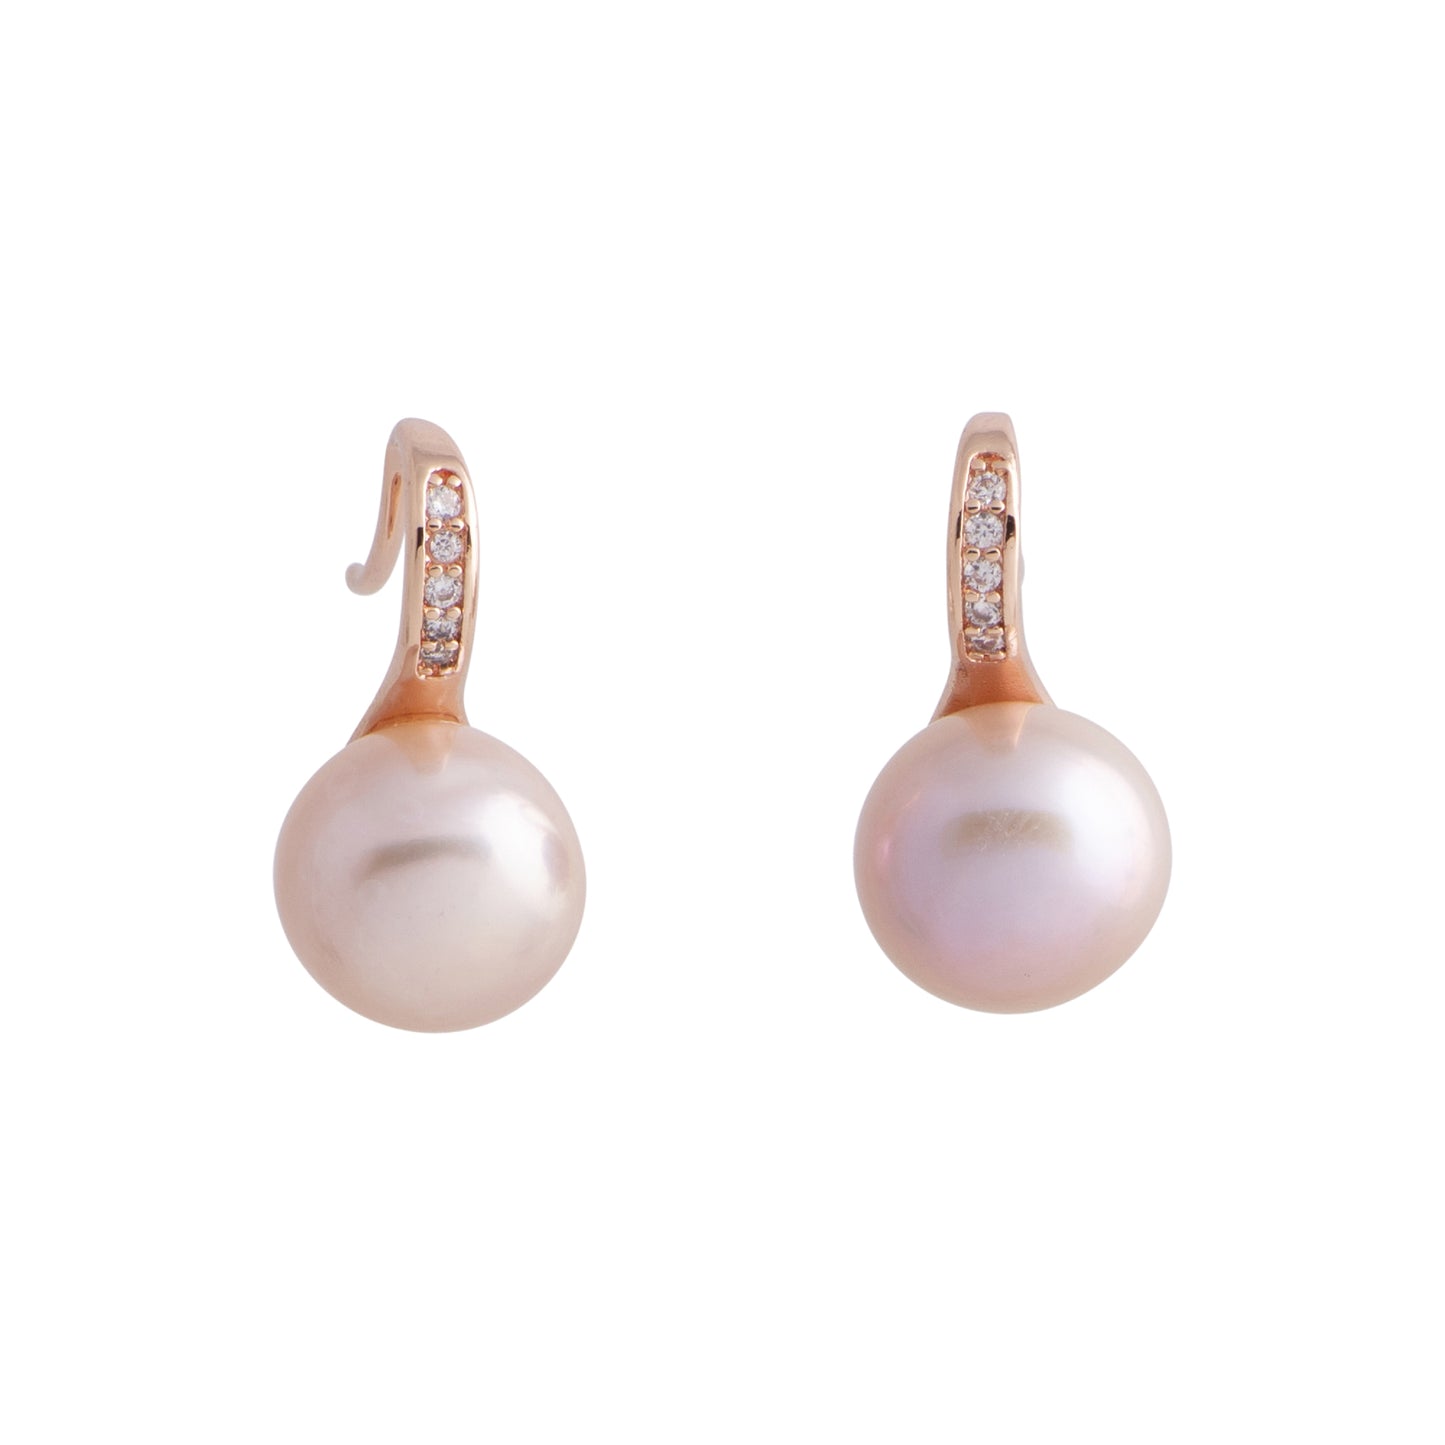 Europa - Rose gold-tone huggie earring with freshwater pearl (Natural pearls)